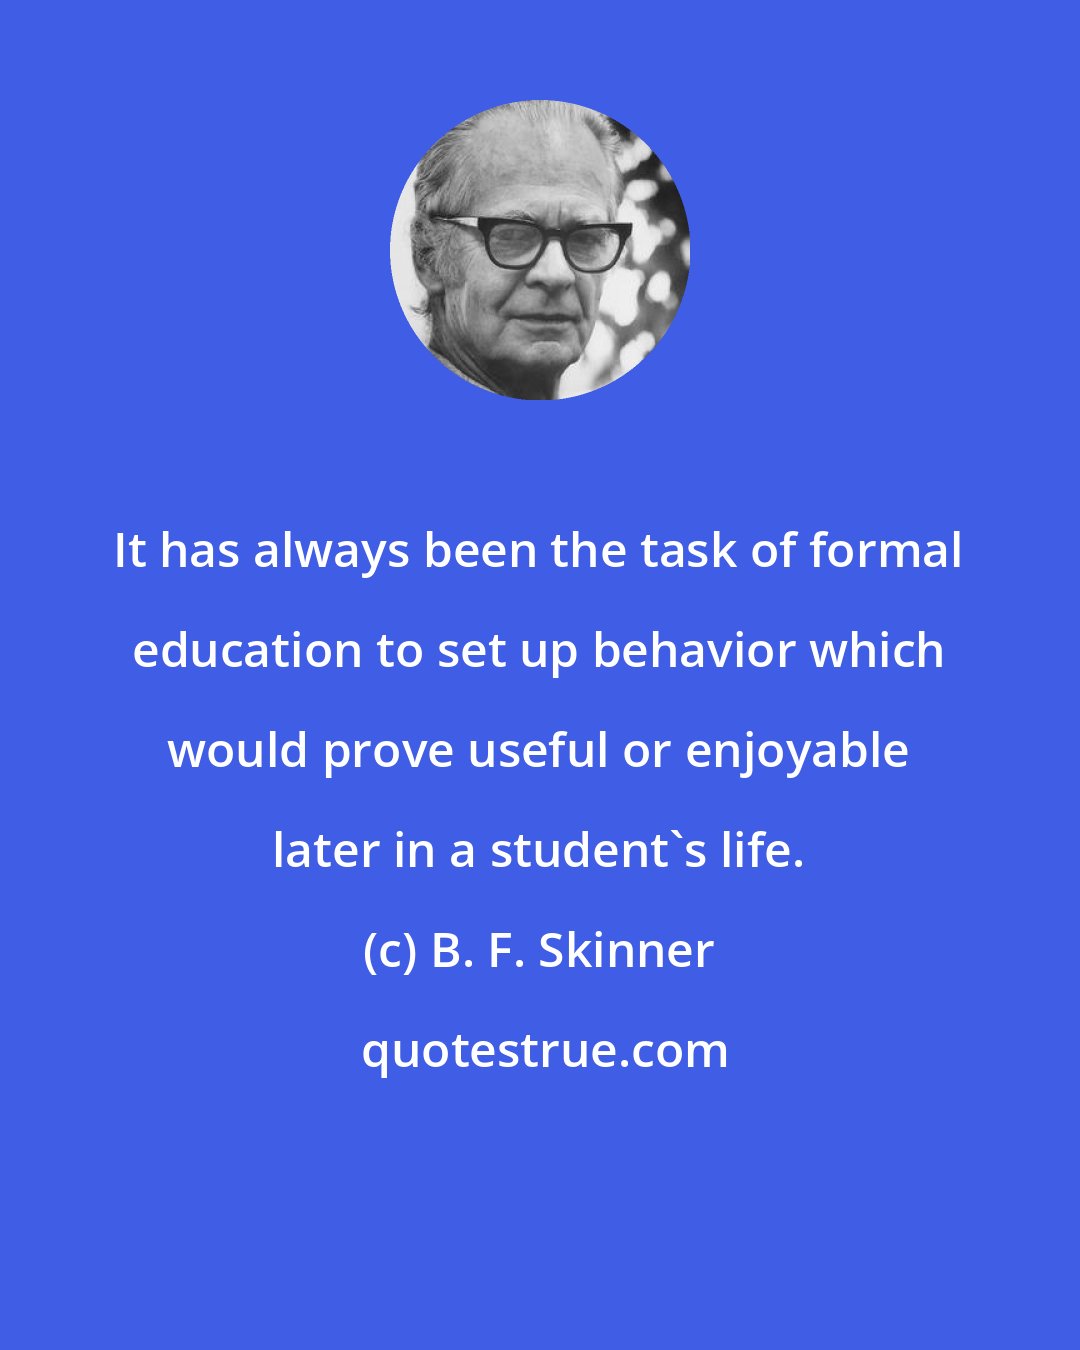 B. F. Skinner: It has always been the task of formal education to set up behavior which would prove useful or enjoyable later in a student's life.